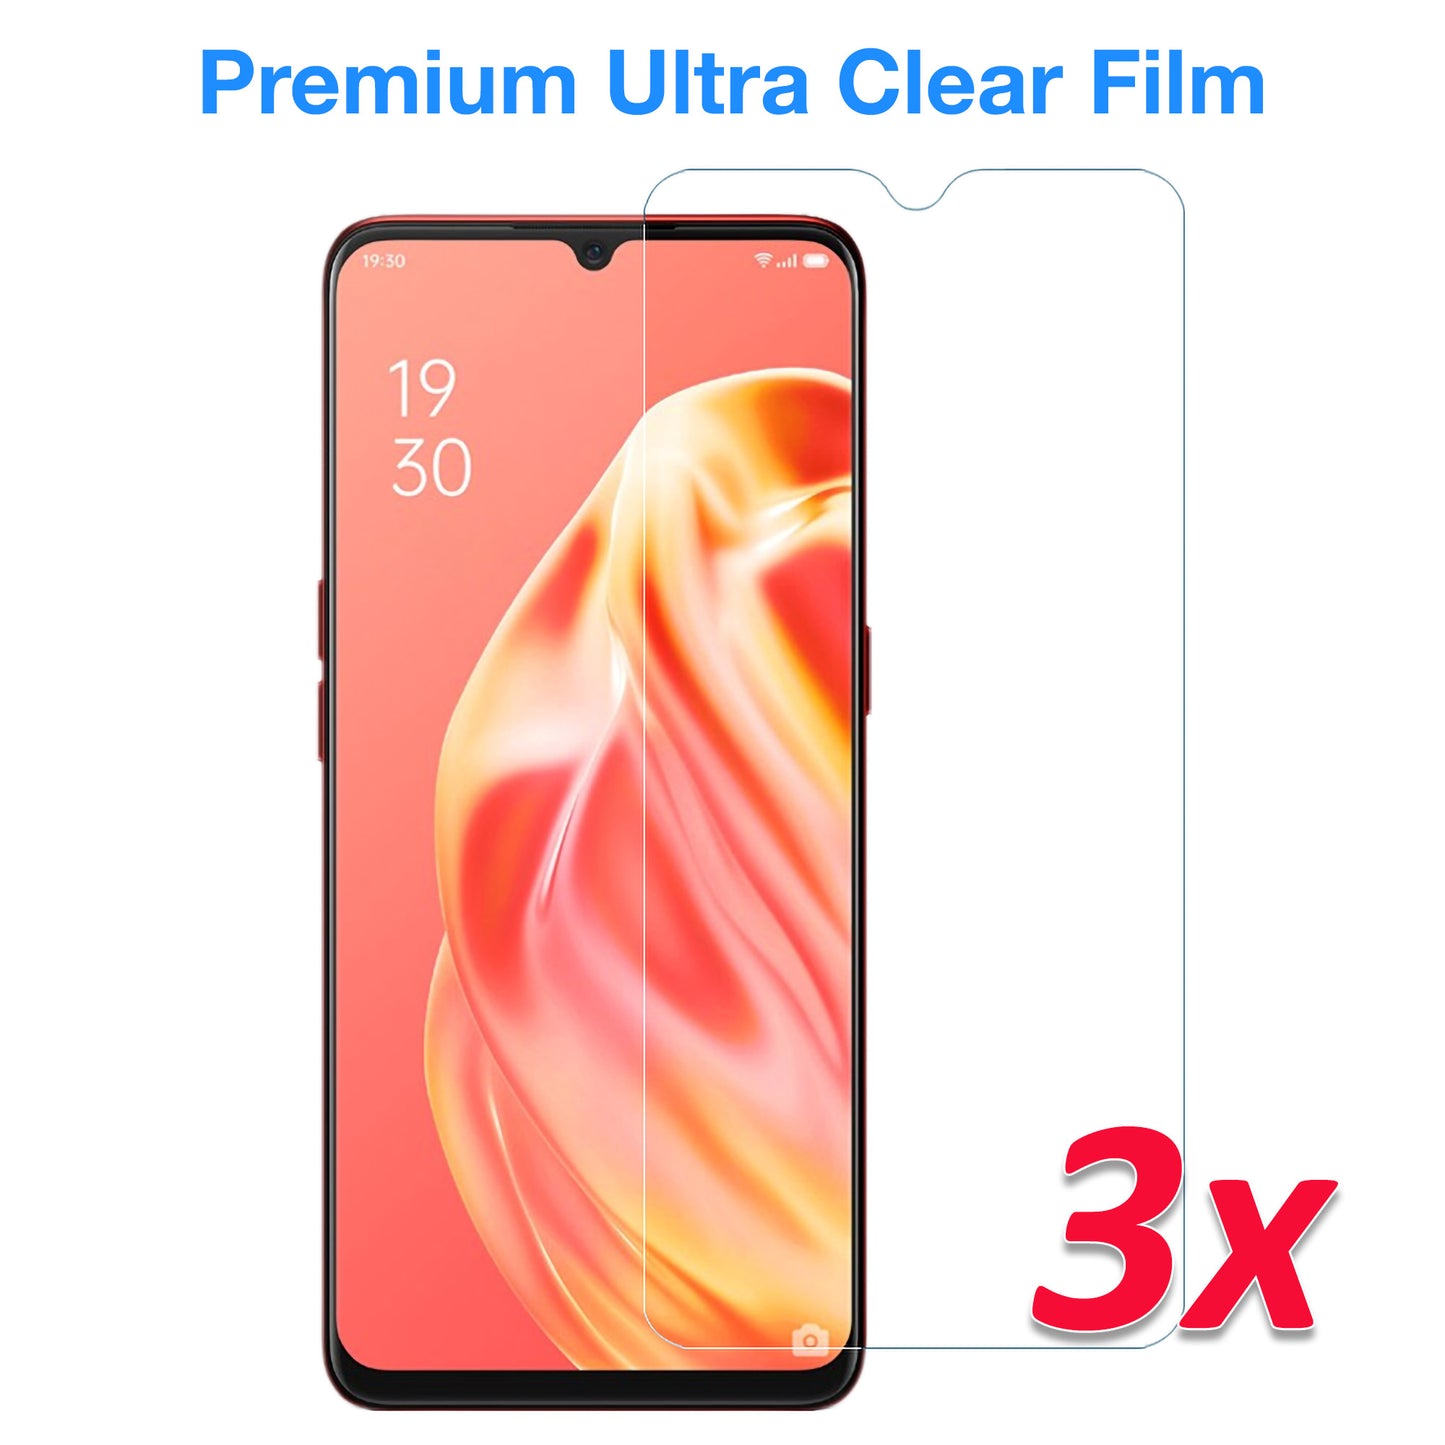 [3 Pack] MEZON Realme C12 Ultra Clear Screen Protector Case Friendly Film (Realme C12, Clear)